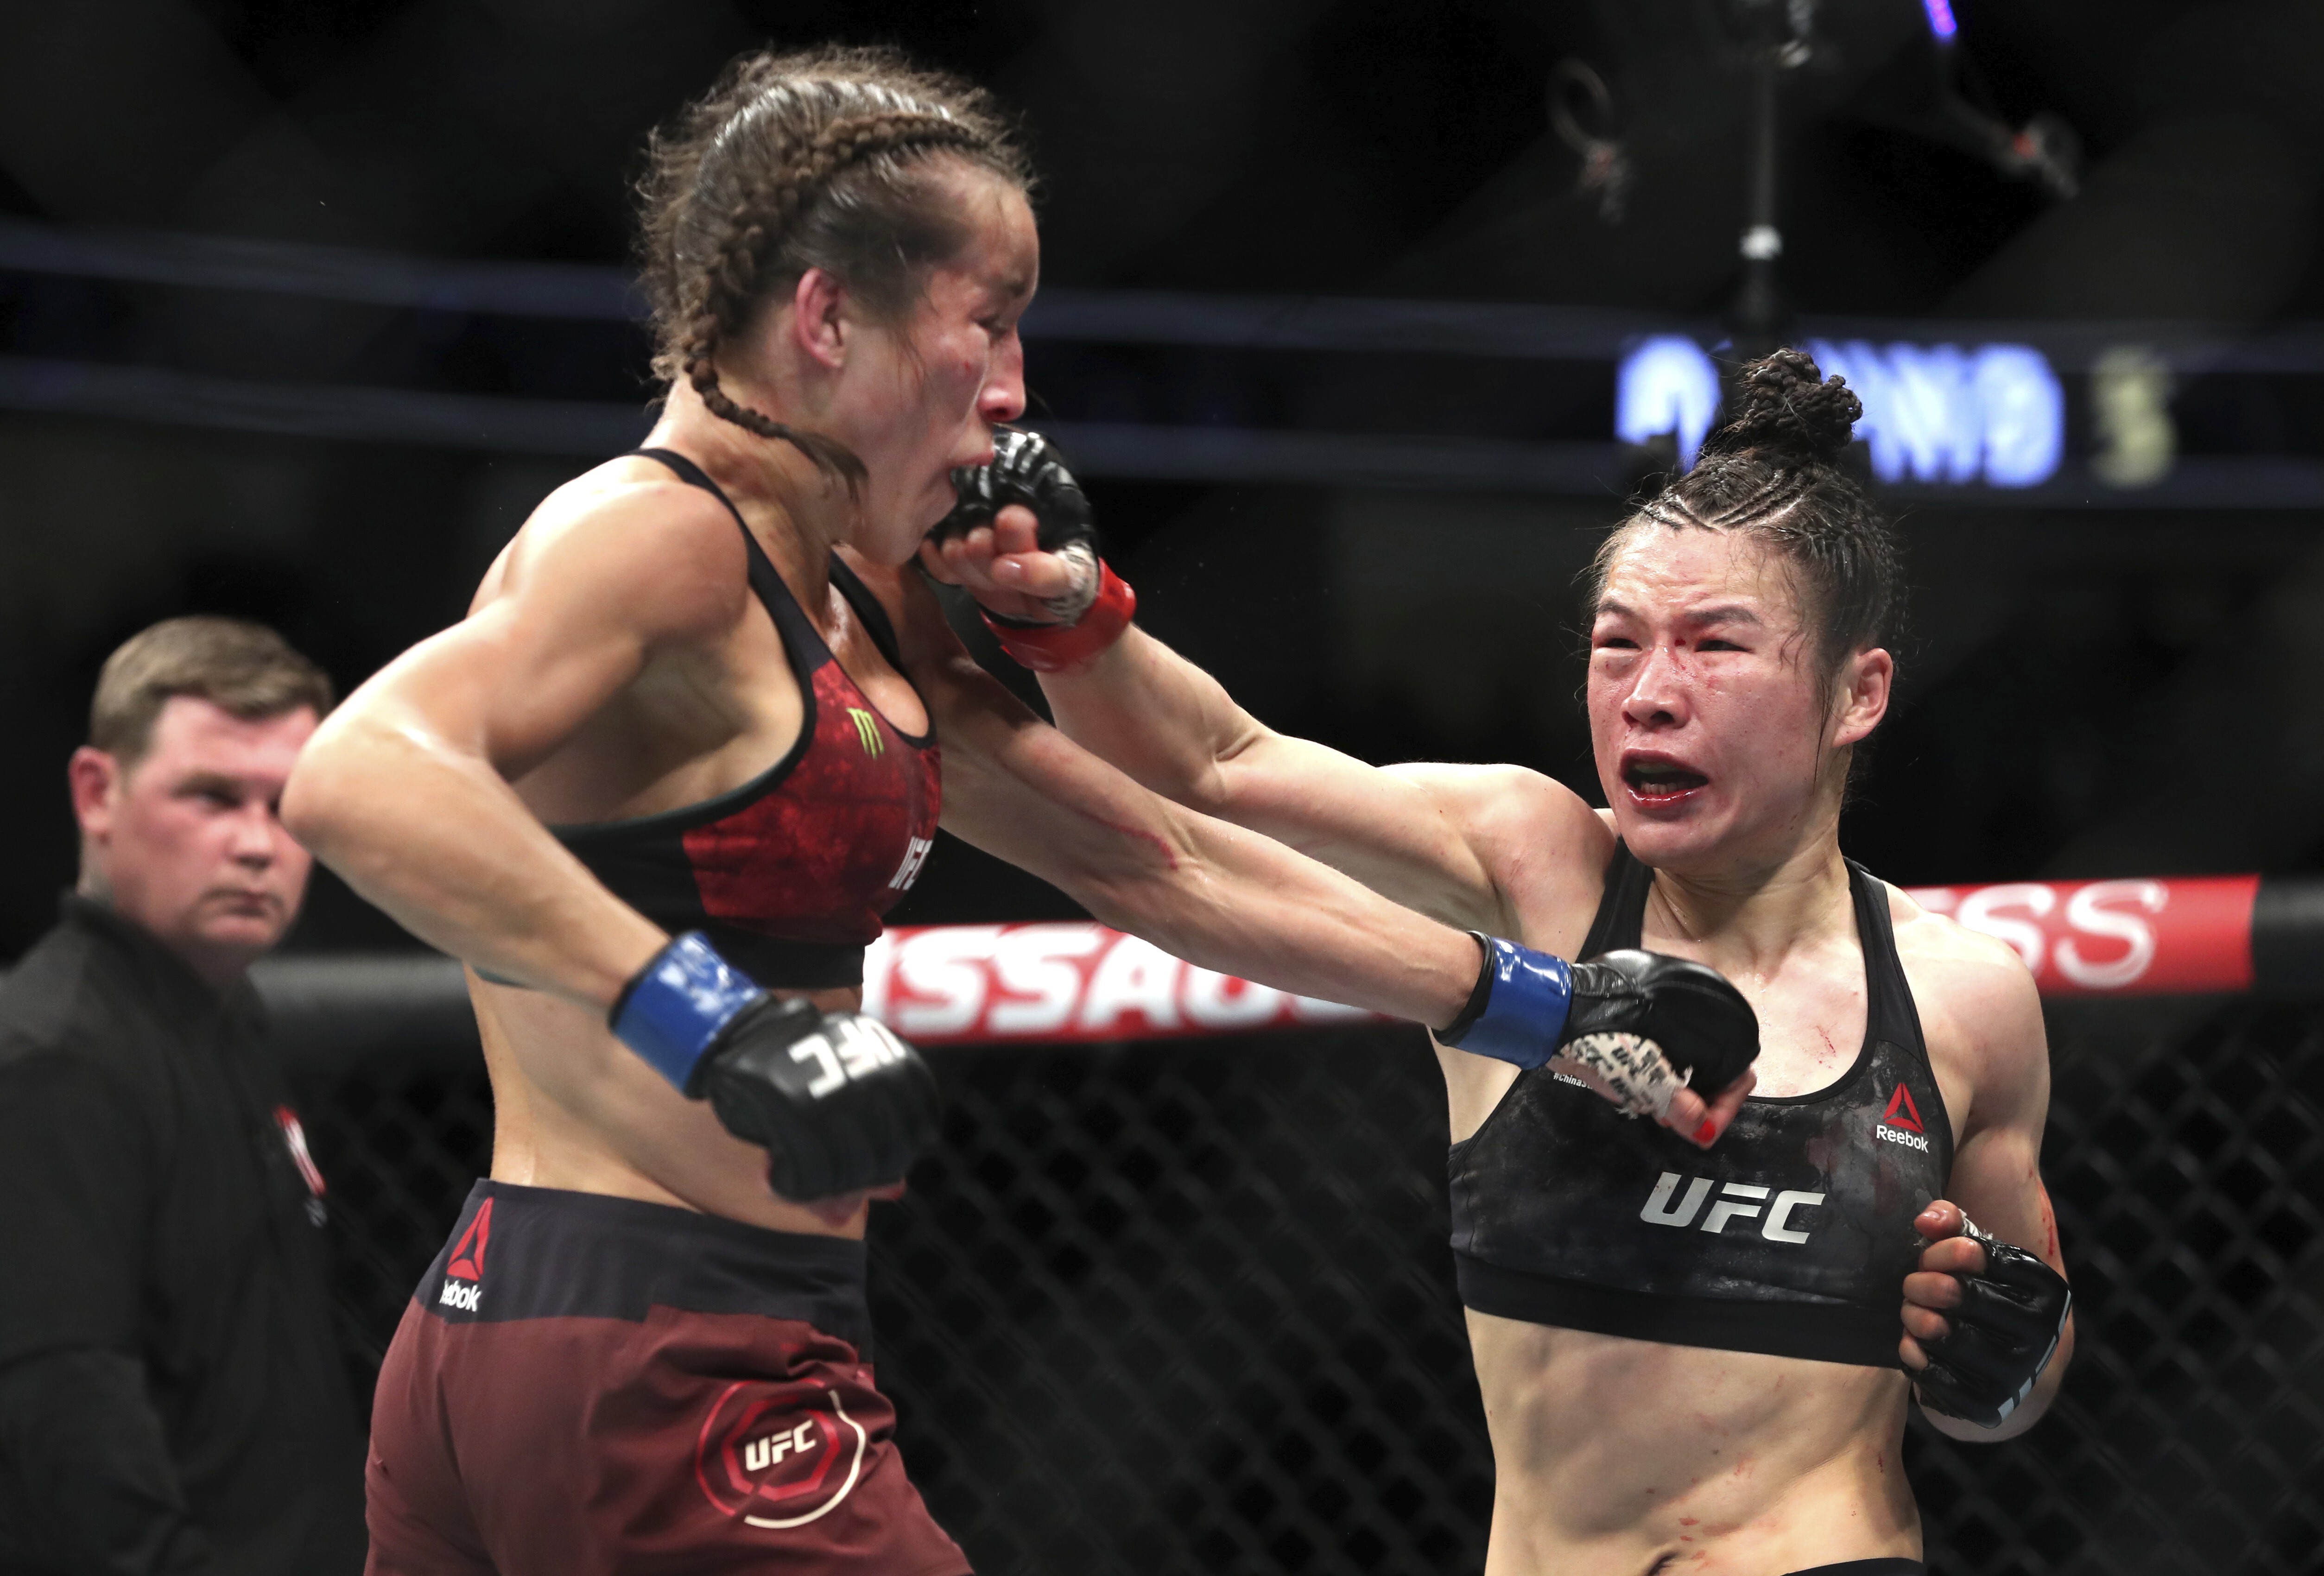 The five fighters UFC strawweight champ Zhang Weili could next | South China Morning Post